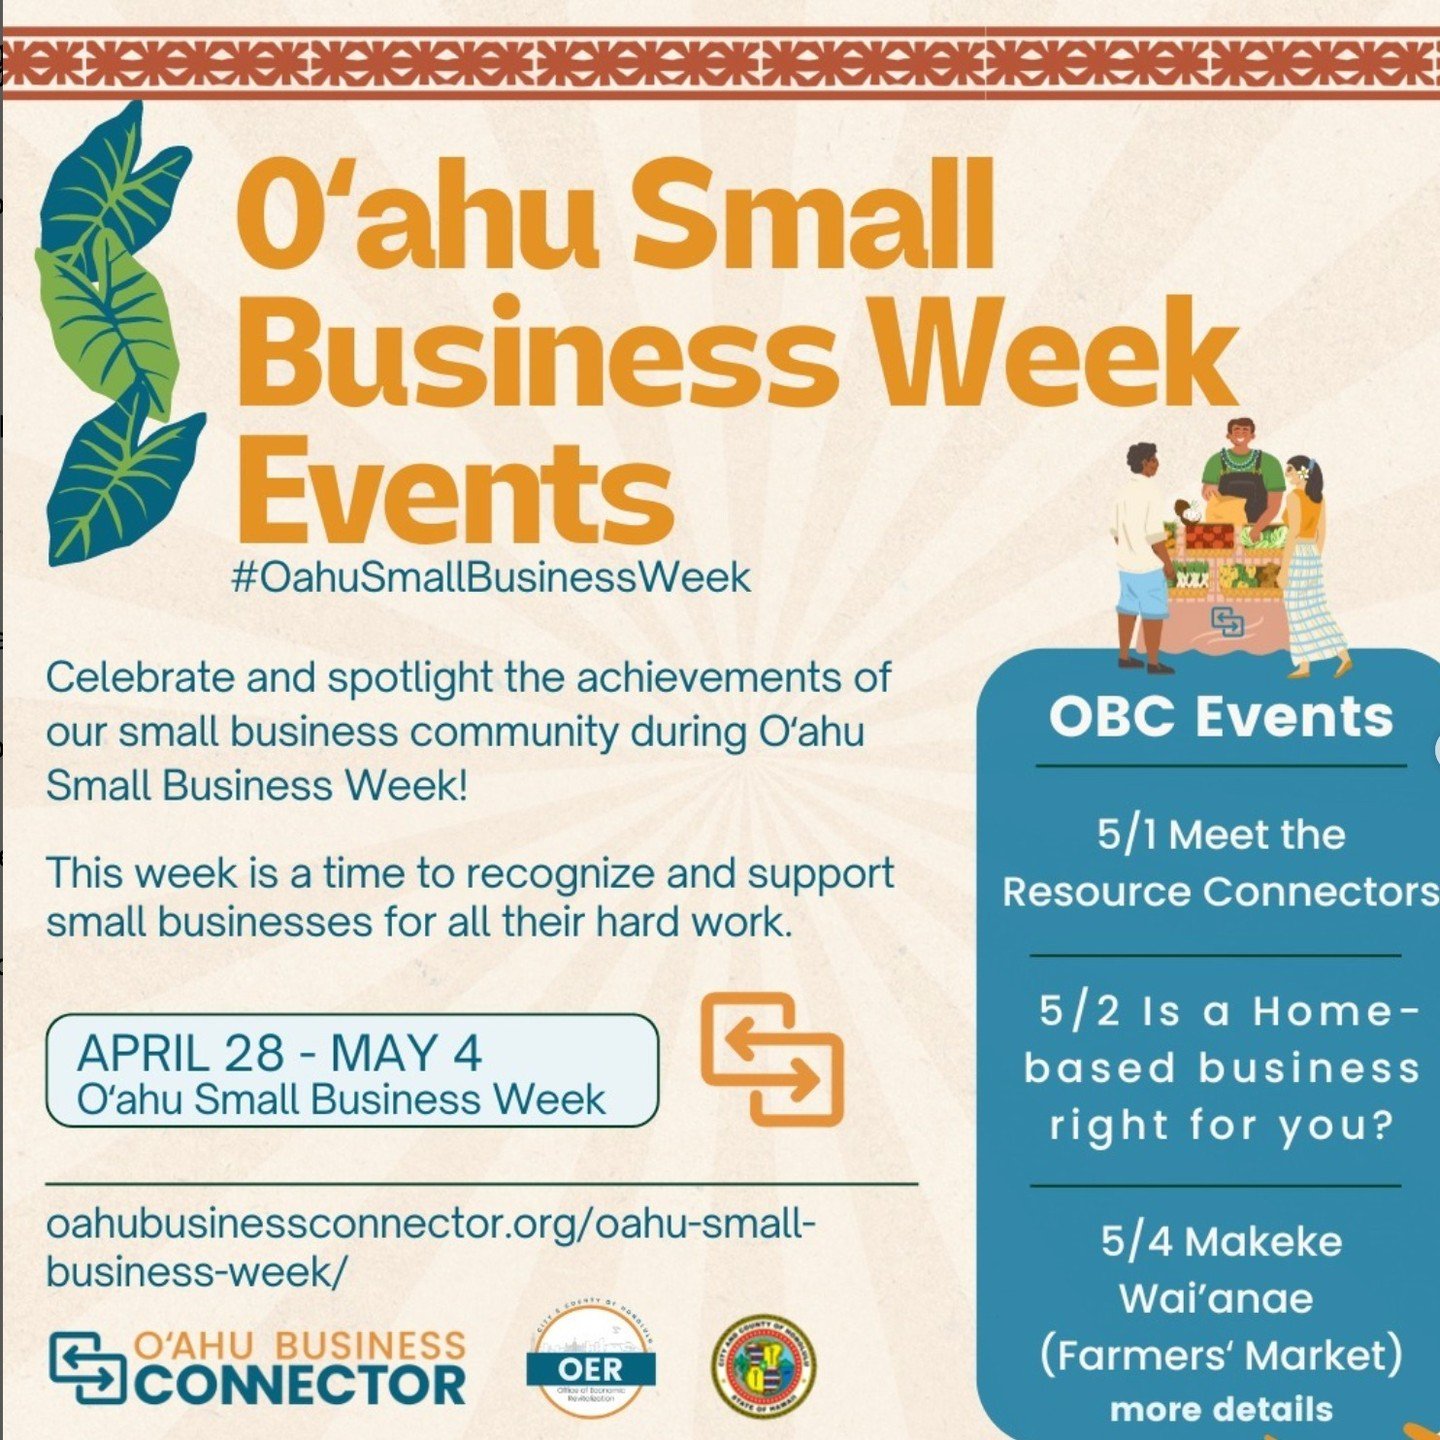 URGENT* Repost from the Office of Economic Revitalization (events happening this week- starting tomorrow!) Check out their IG for clickable links to their website and more details on their OBC events 5/1-5/4

-----------------------------------------